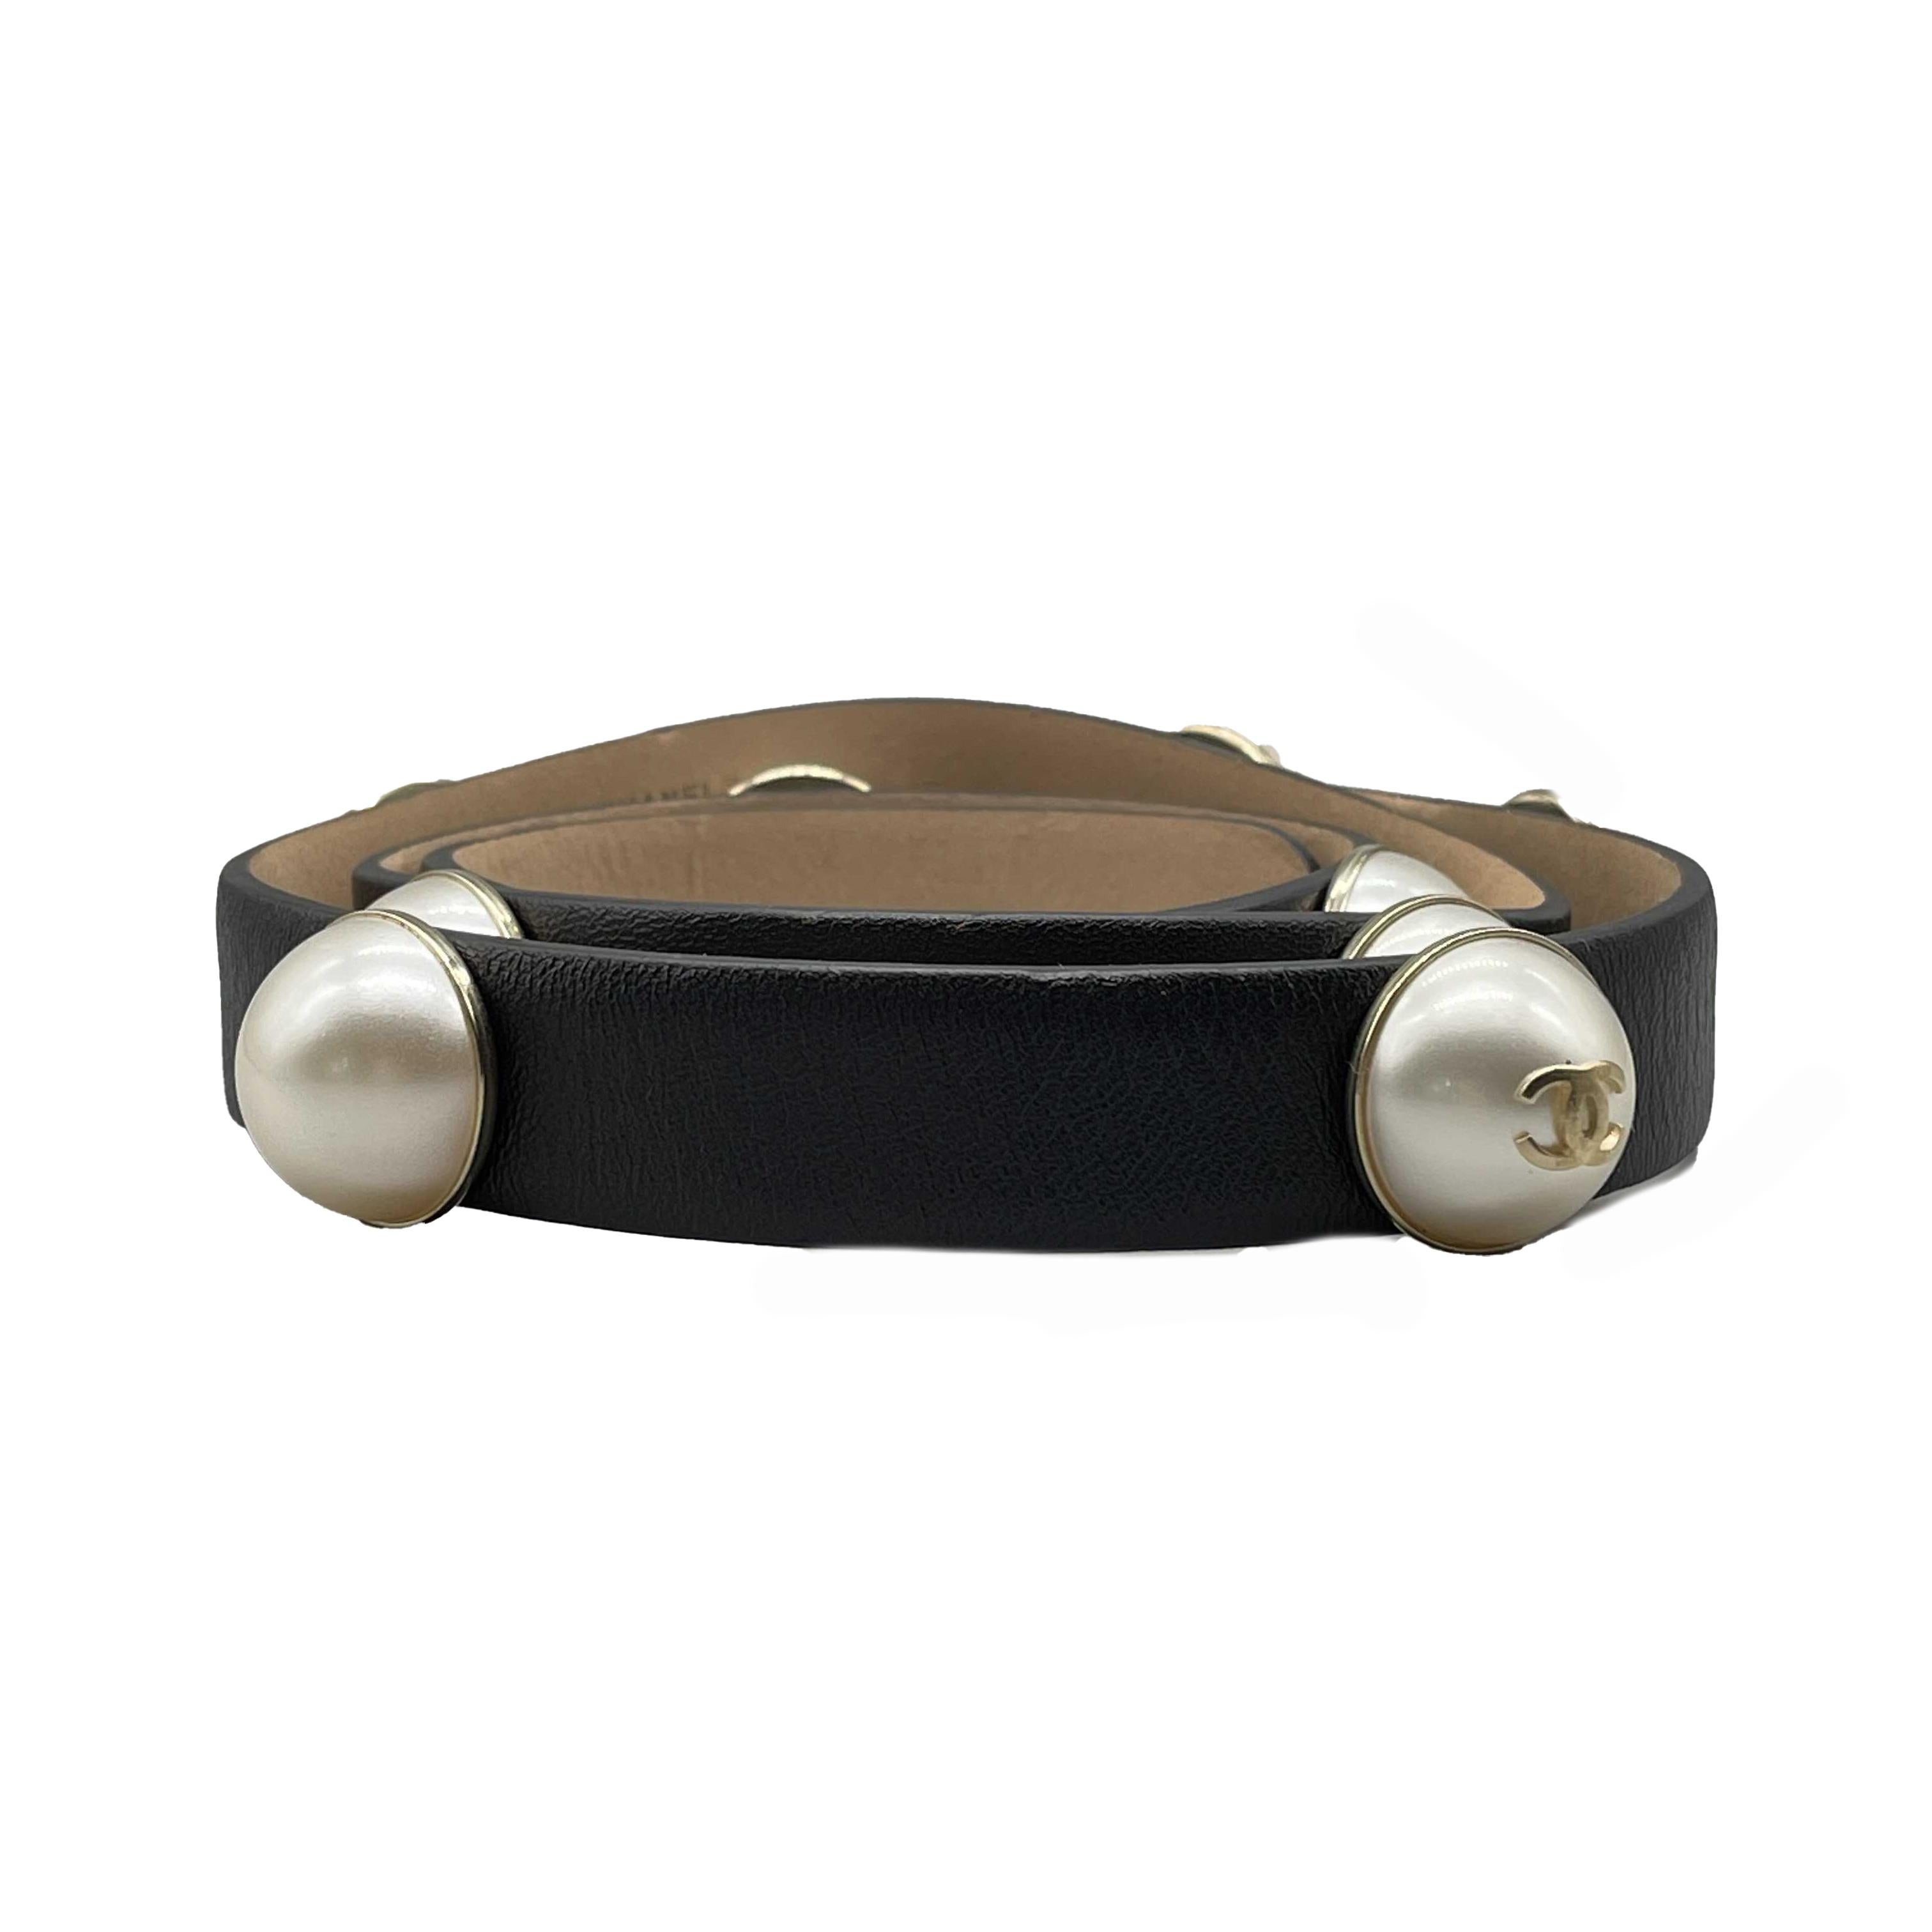 CHANEL - Excellent - B13 S Studded Faux CC Pearl Leather - Black, White, Champaign Gold-Toned Hardware - 80/32 - Belt

Description

This Chanel belt is from the 2013 Summer/Spring Act 2 collection (stamped on the backside 